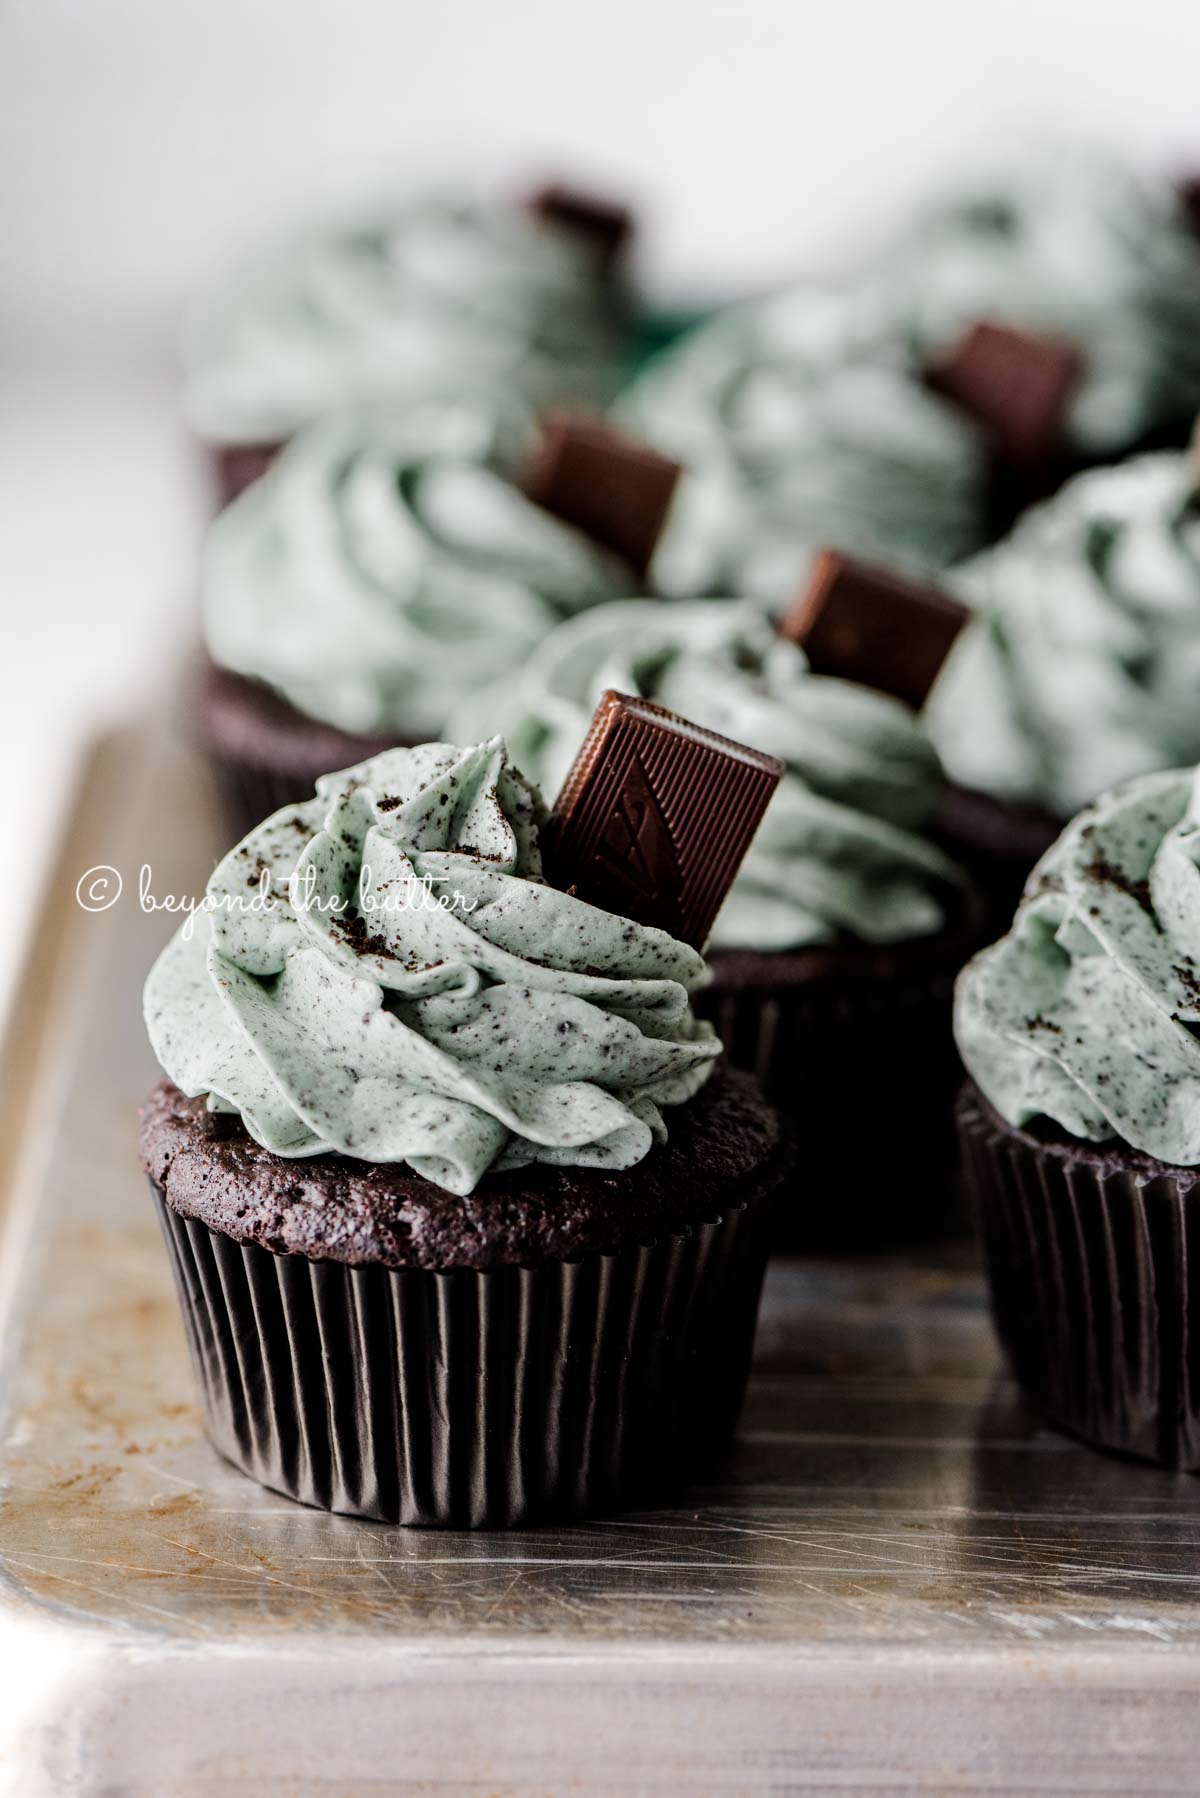 Mint chocolate cupcakes on an upside down baking sheet | All Images © Beyond the Butter®